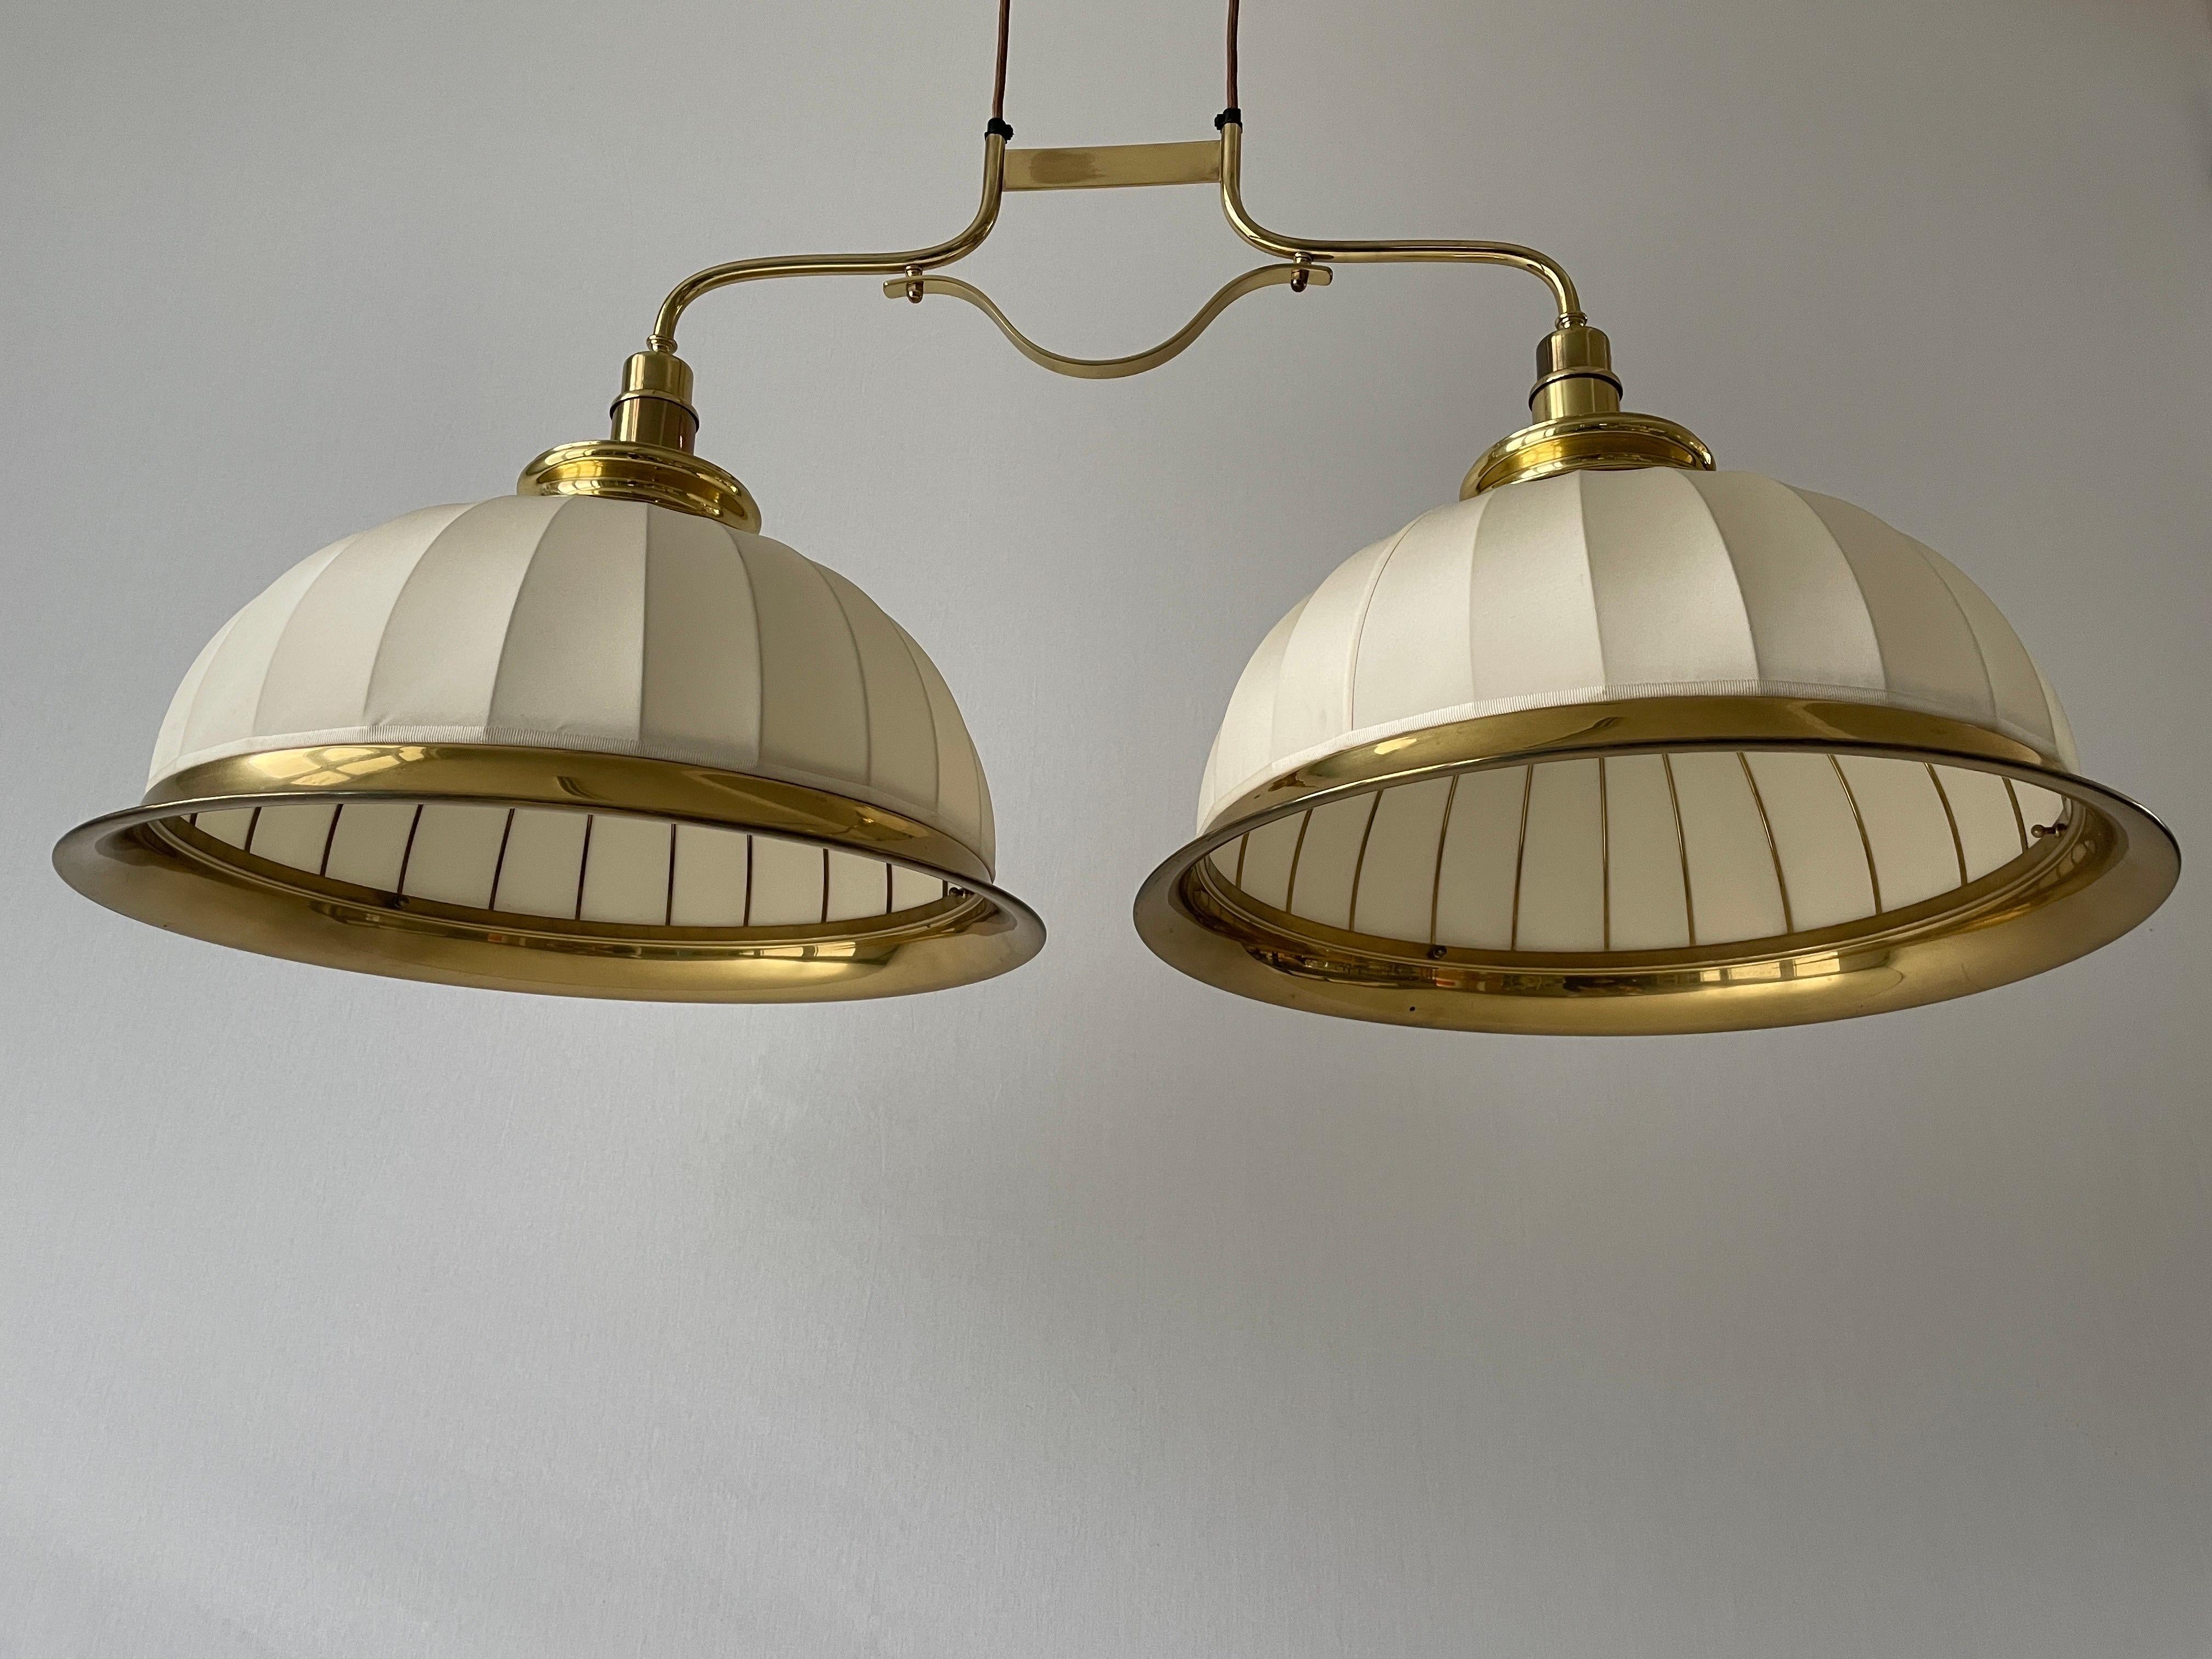 Mid-century Modern Brass body and Fabric Shade Twin-shade Billiard Ceiling Lamp by WKR, 1960s, Germany

Adjustable large lampshades.

Brass body & fabric shade
Manufactured in Germany

This lamp works with 2x E27 light bulbs.

Measures: 
Height: 165